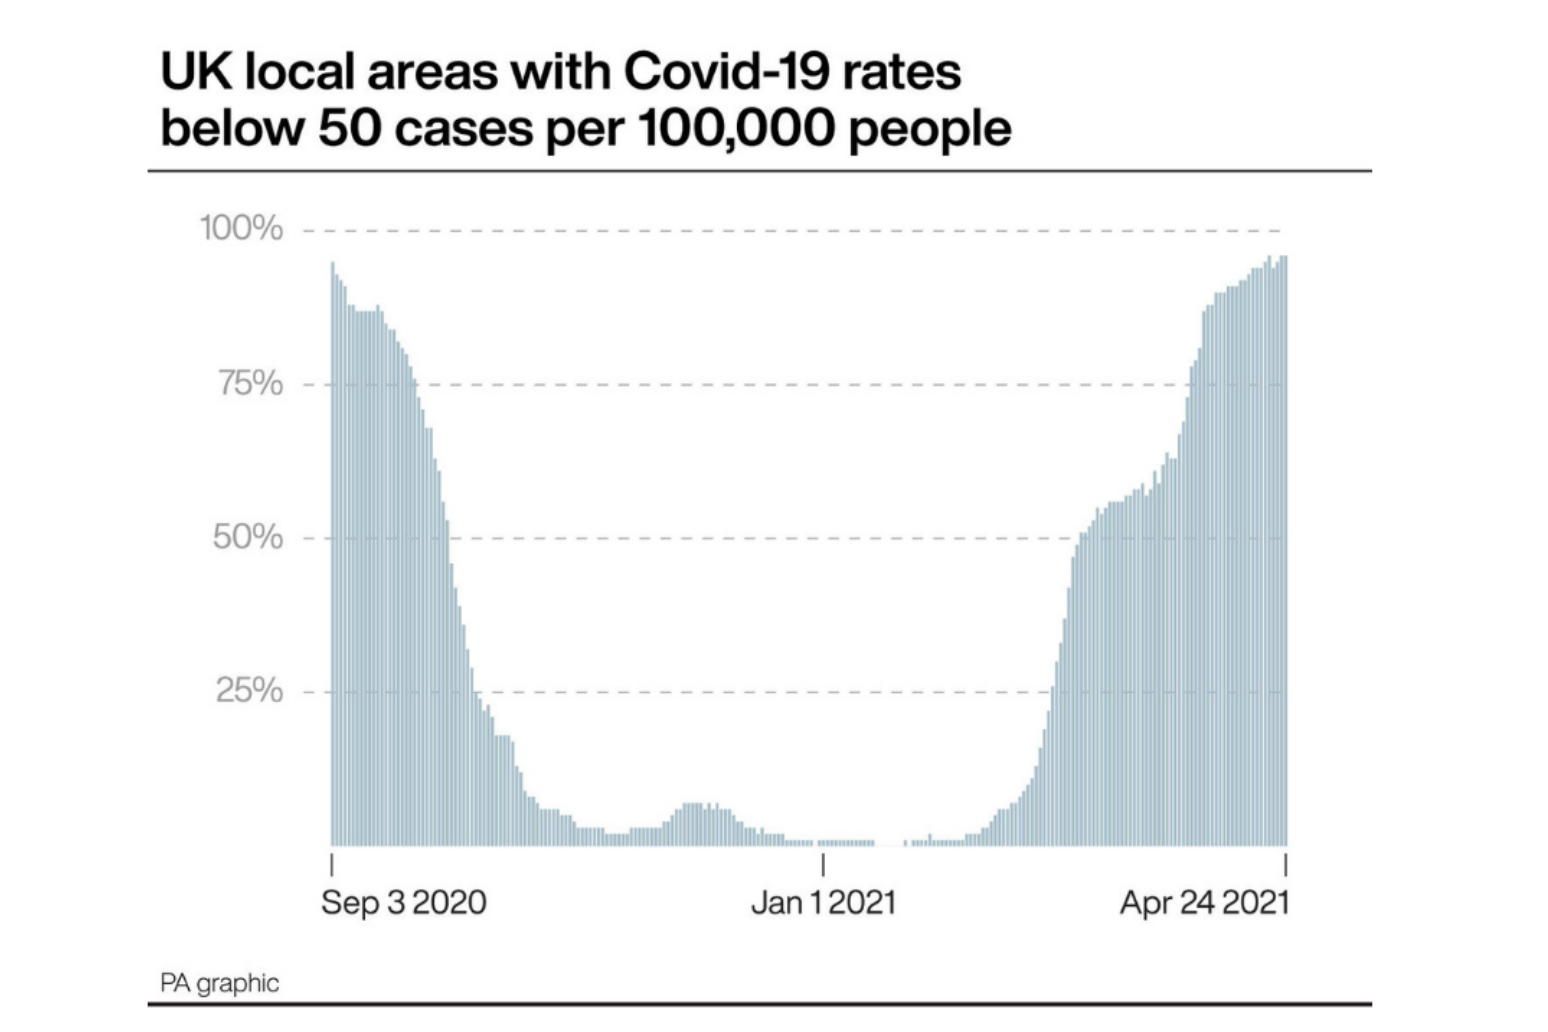 Covid-19 rates drop below 50 per 100,000 in 19 out of 20 local areas 